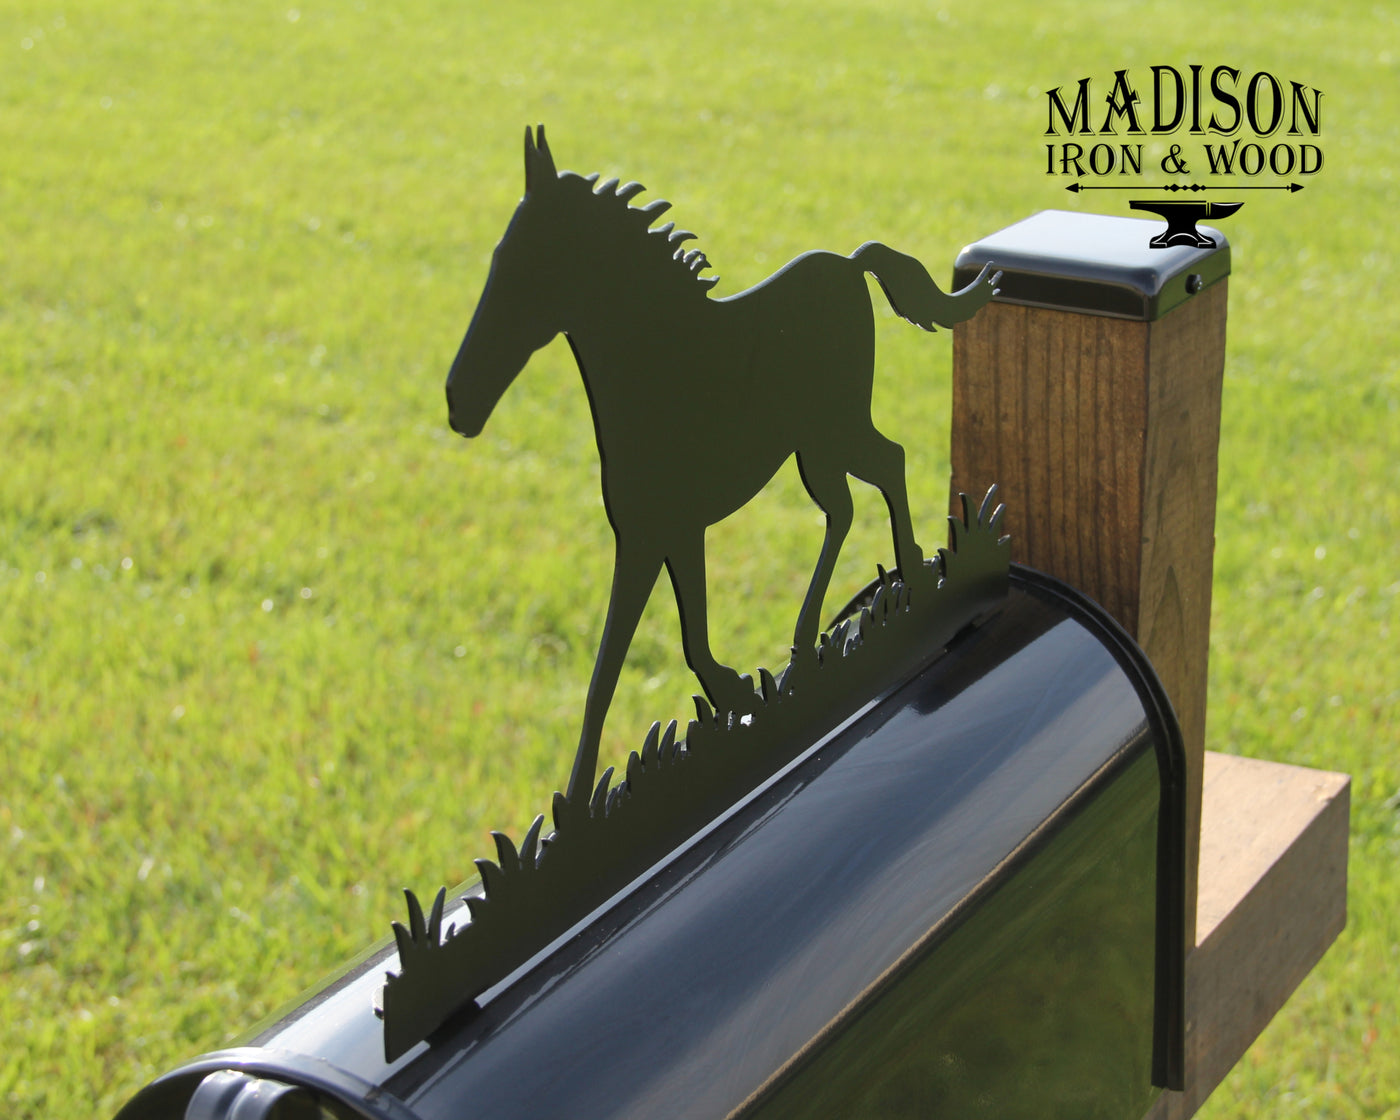 Horse Mailbox Topper - Madison Iron and Wood - Mailbox Post Decor - metal outdoor decor - Steel deocrations - american made products - veteran owned business products - fencing decorations - fencing supplies - custom wall decorations - personalized wall signs - steel - decorative post caps - steel post caps - metal post caps - brackets - structural brackets - home improvement - easter - easter decorations - easter gift - easter yard decor